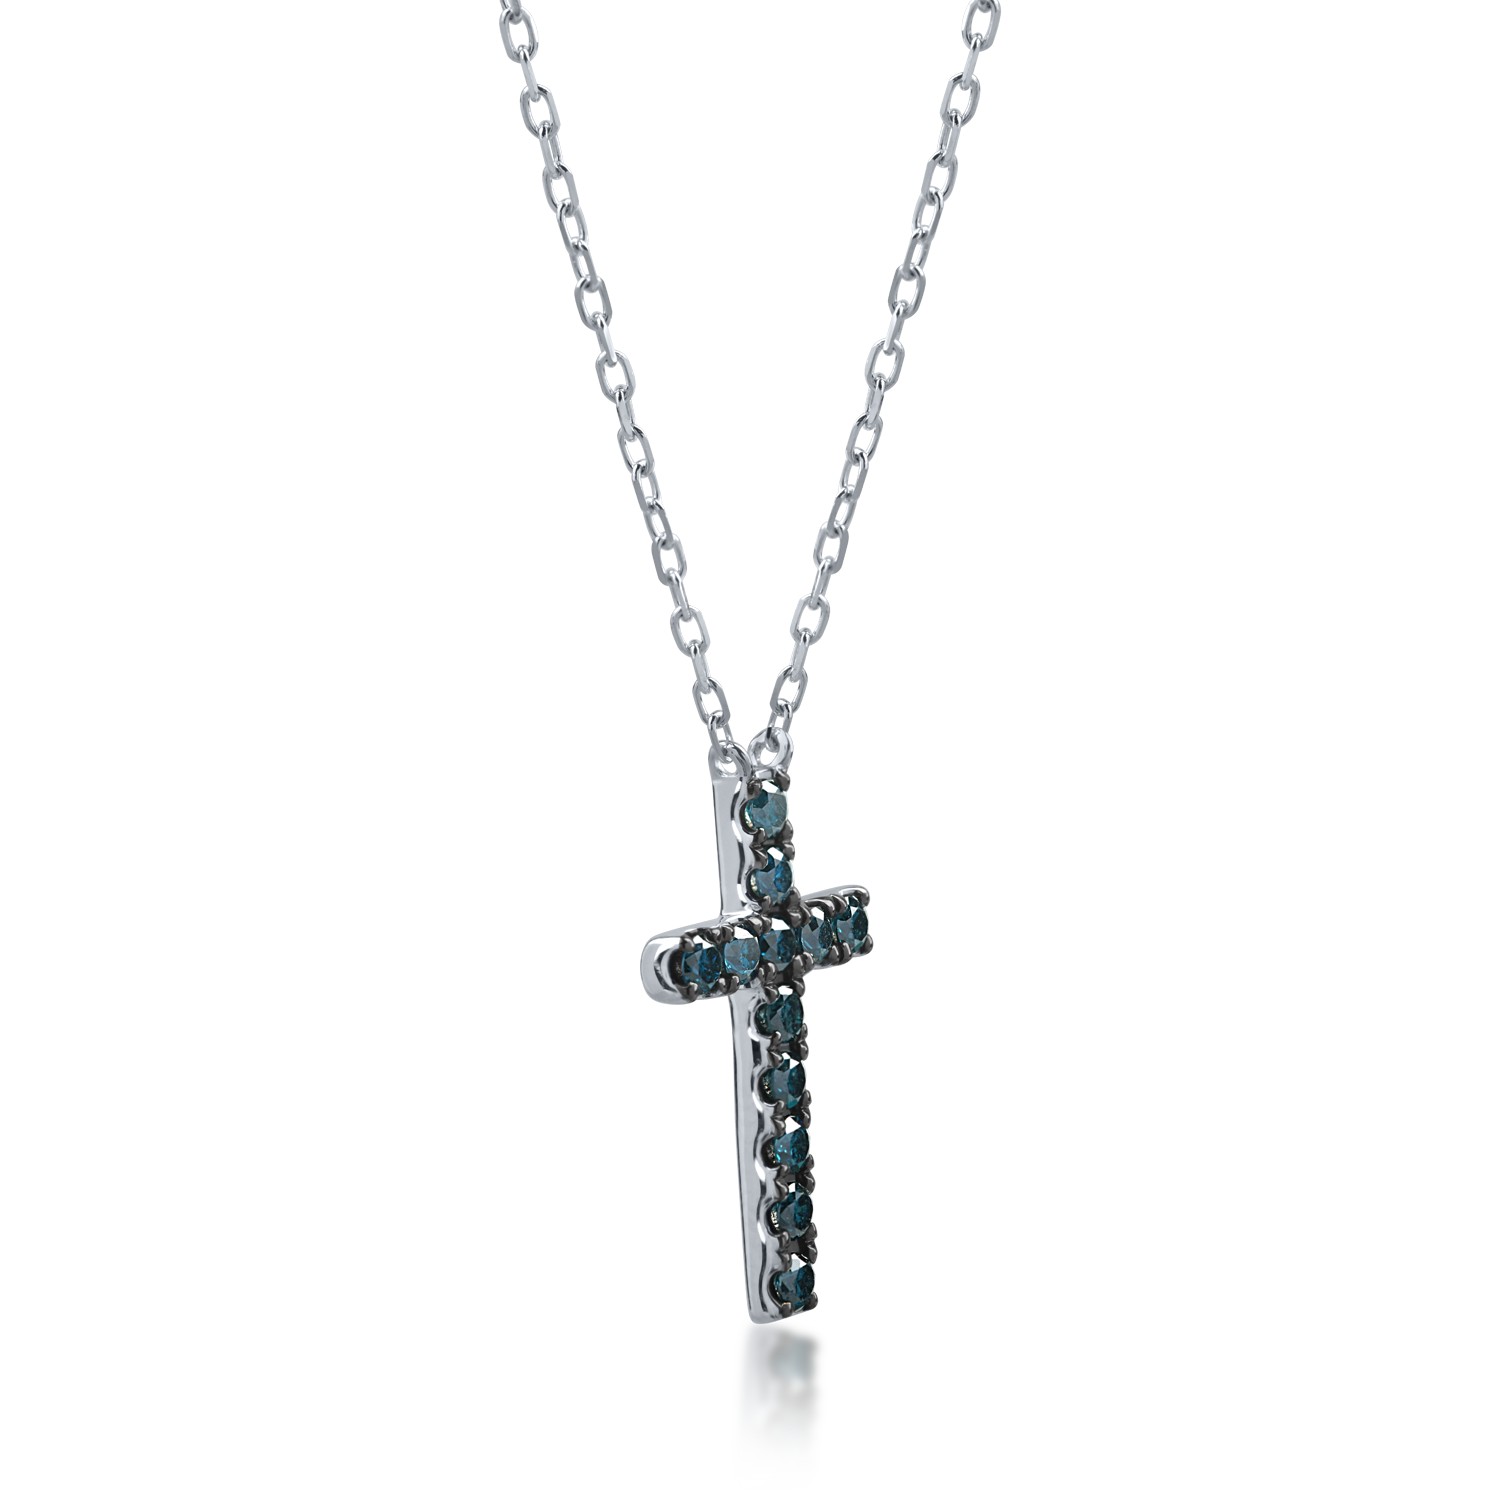 White gold cross pendant necklace with 0.41ct blue diamonds